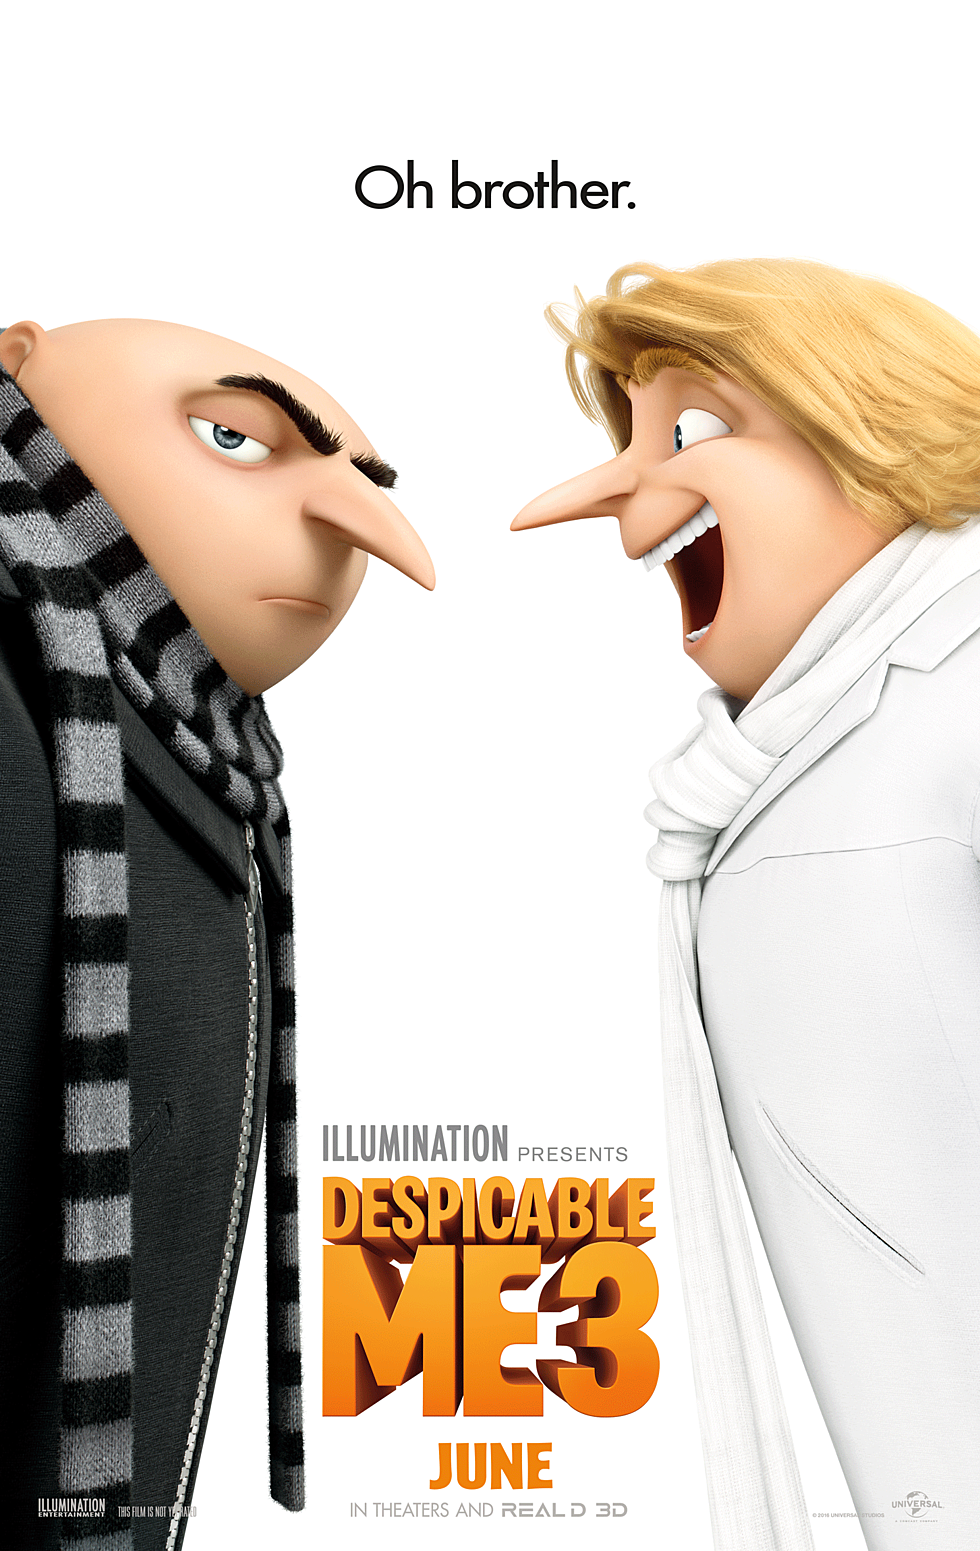 Family-Friendly Fun at the Movies, See Despicable Me 3